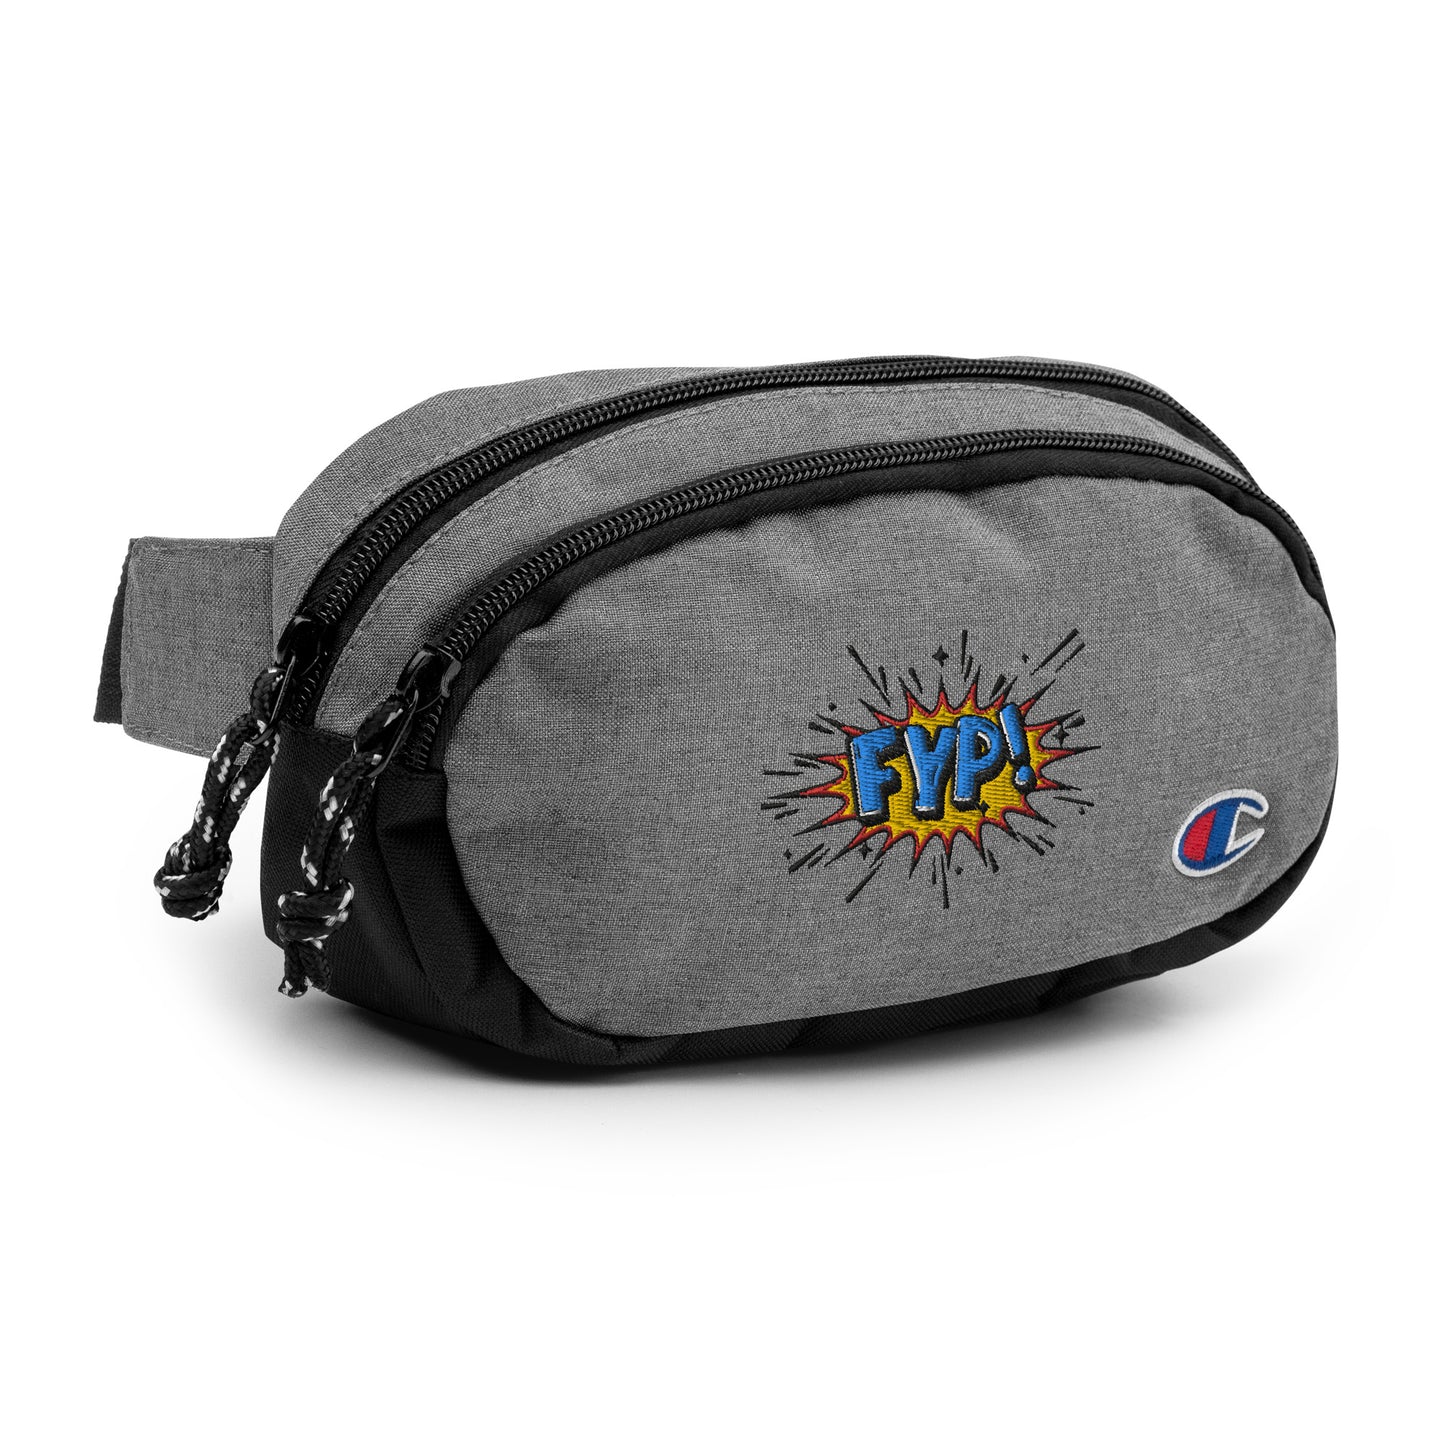 FYP Comic fanny pack